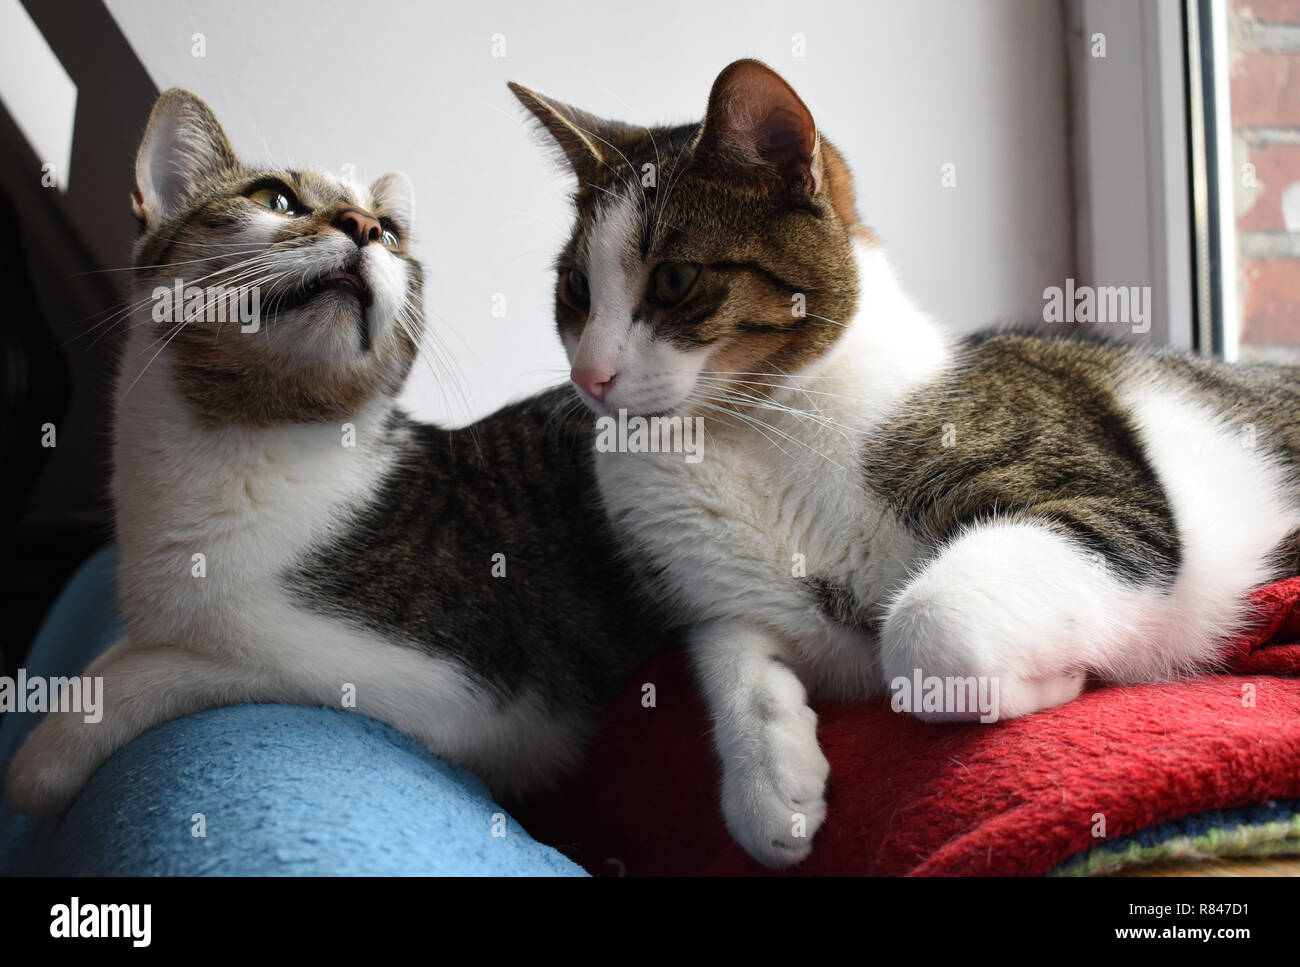 Two alley cats lying on red and blue blankets. Furry feline siblings. Stock Photo